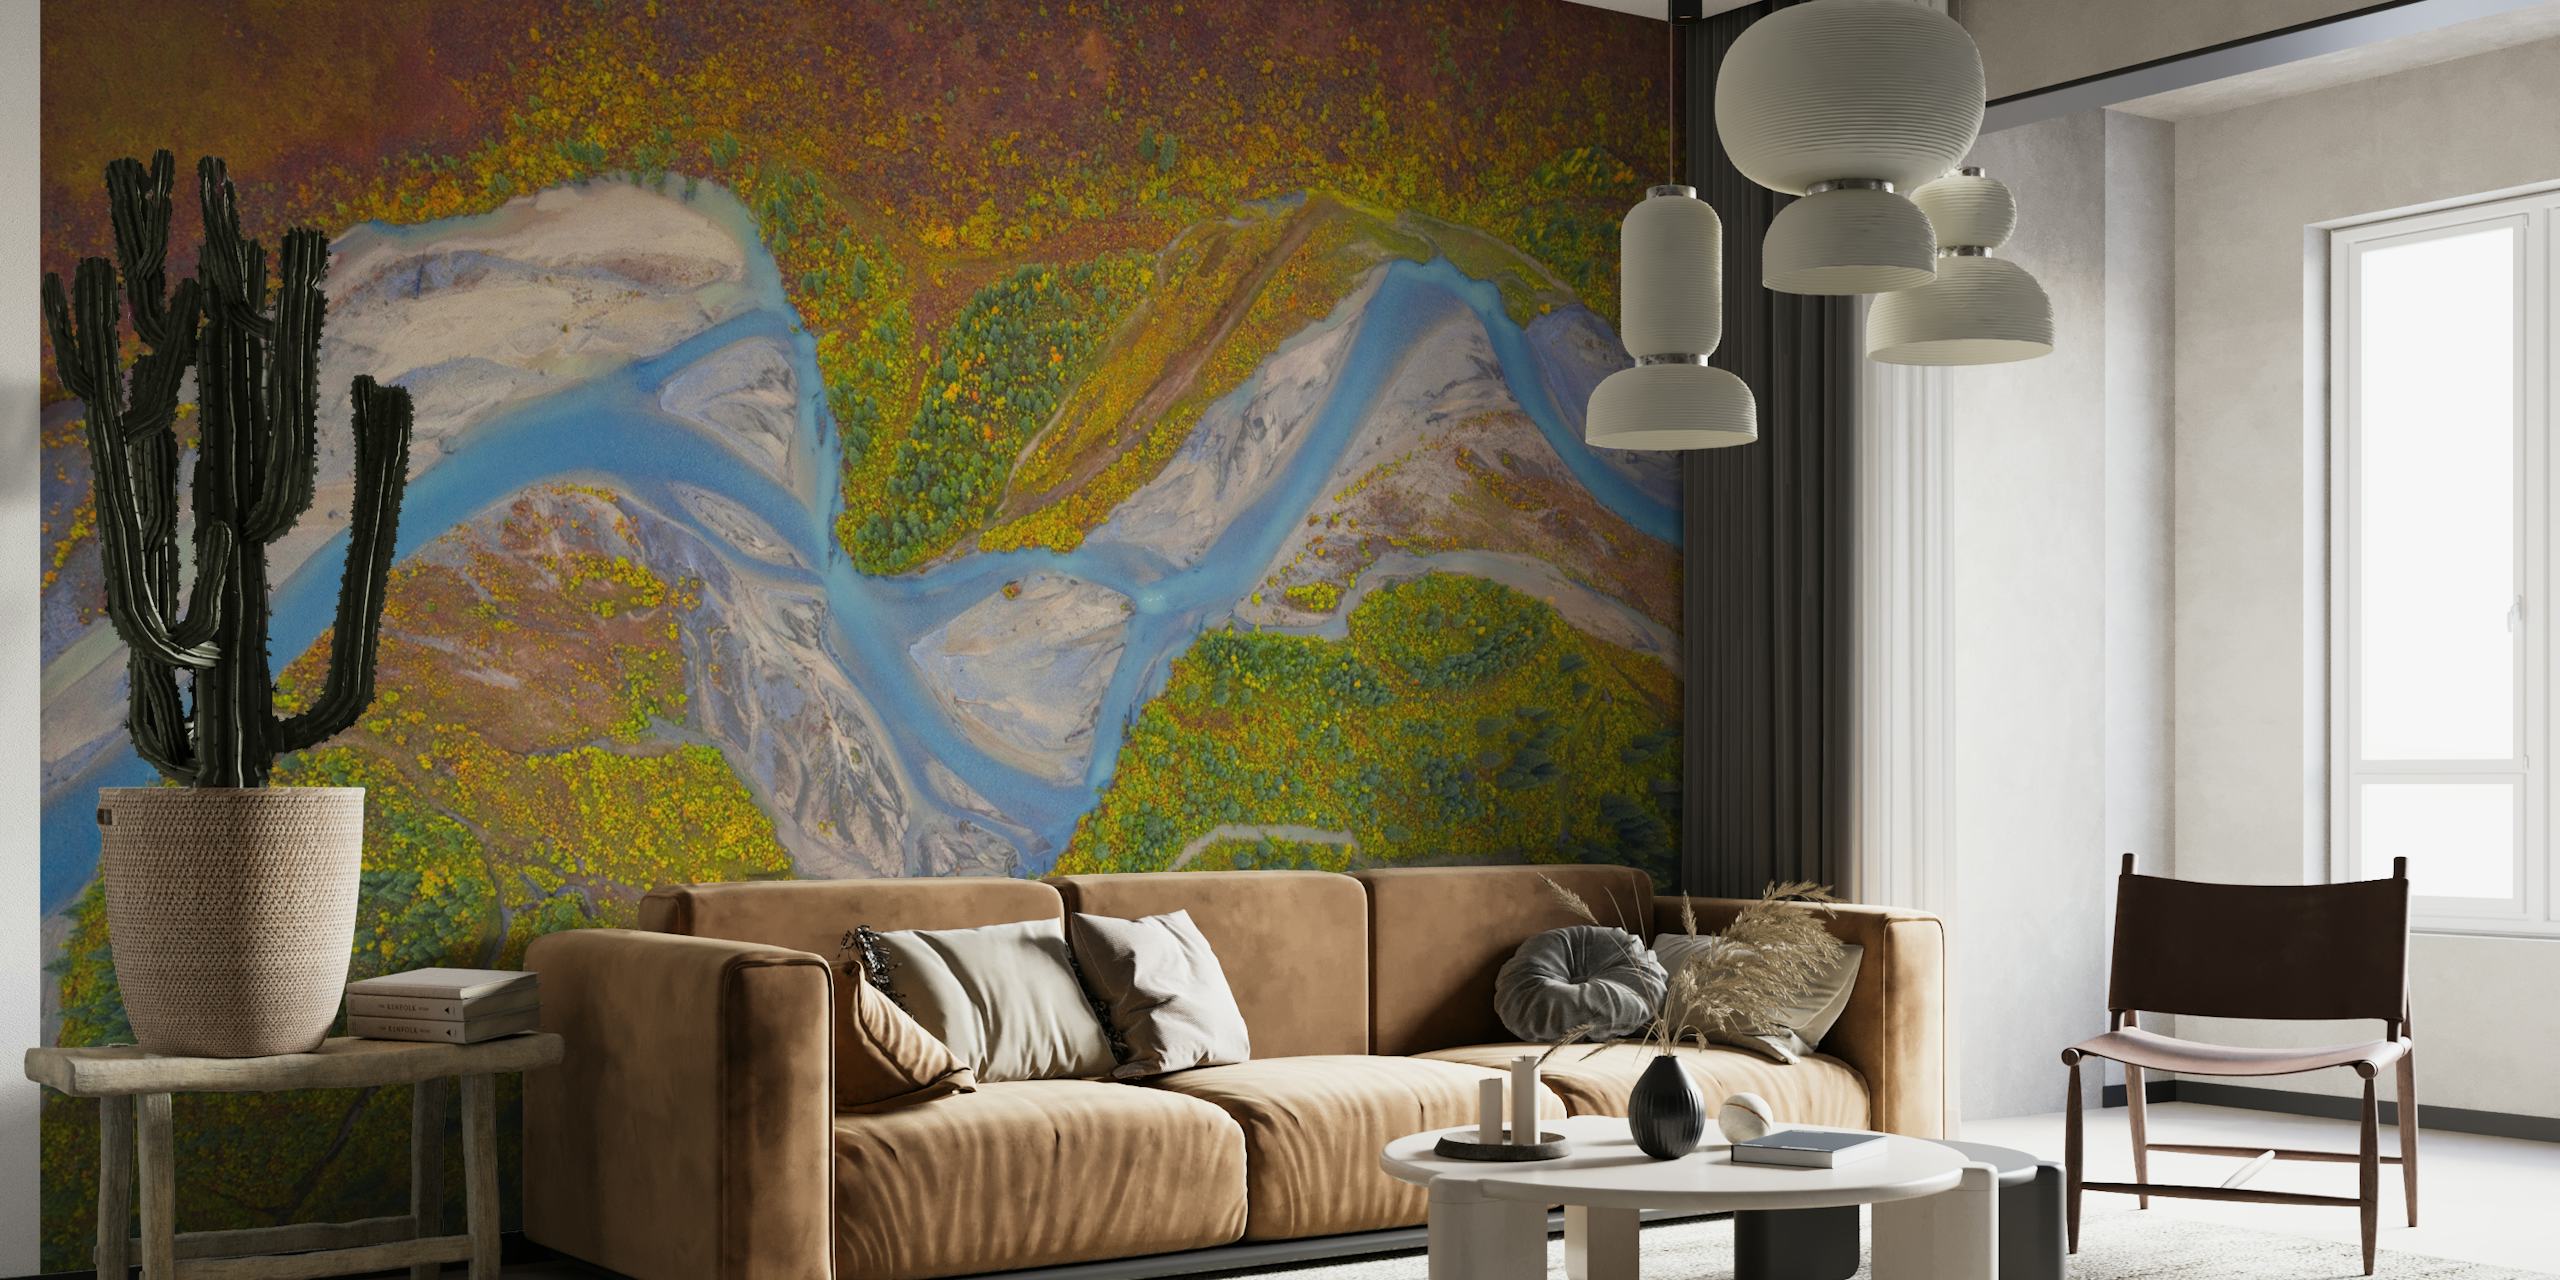 Matanuska River wall mural with scenic Alaskan landscape, featuring a winding river and colorful meadows